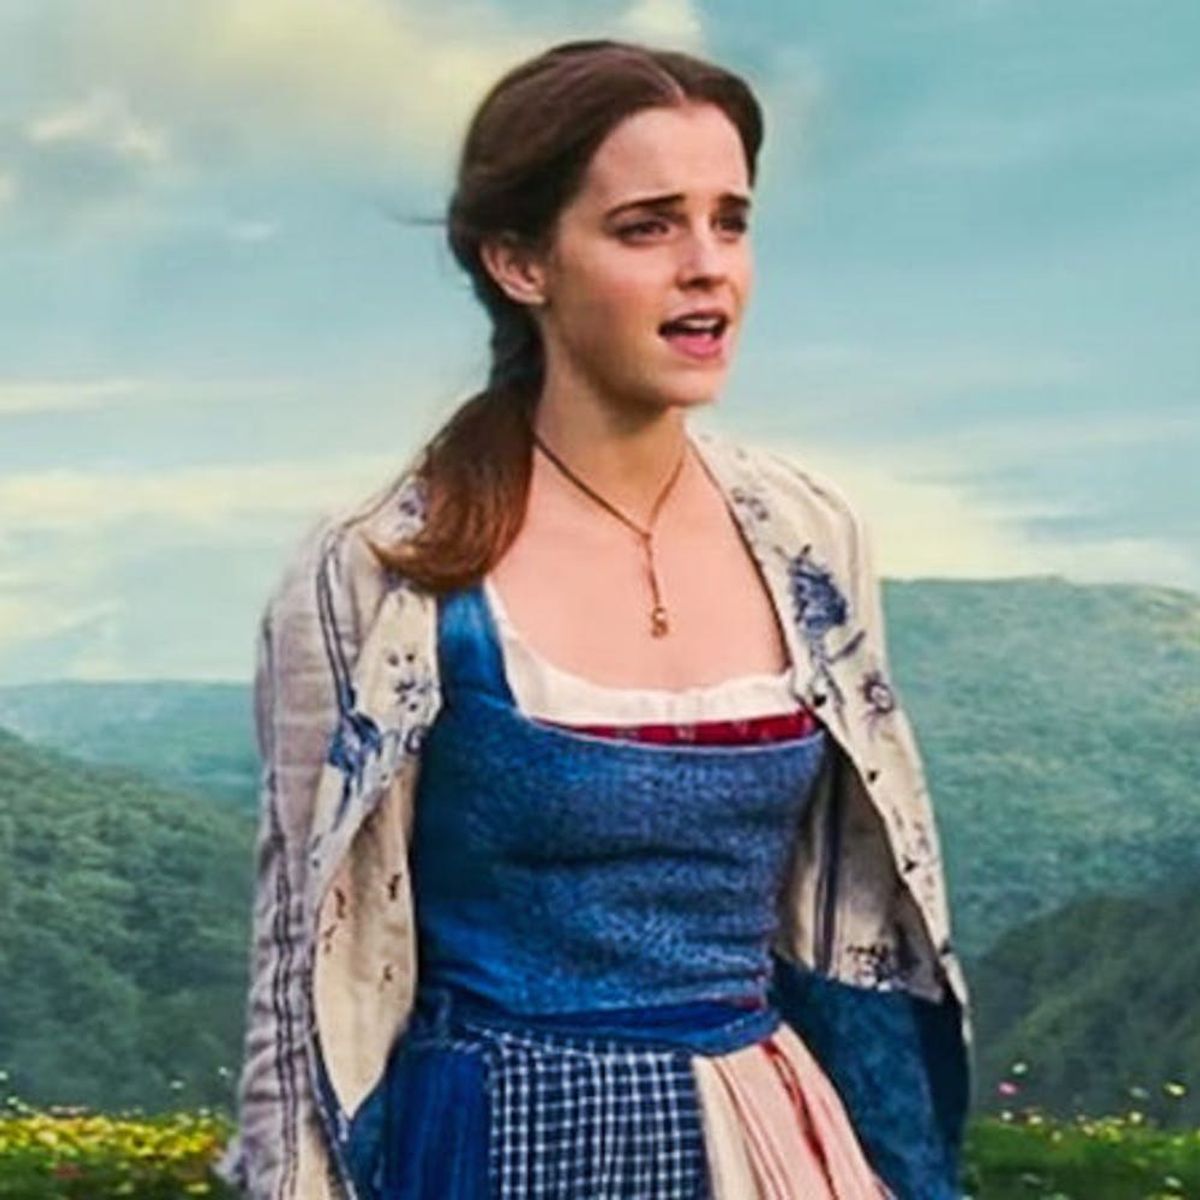 Emma Watson’s Performance in Beauty and the Beast’s Opening Number Will Make You Want to Burst Out in Song